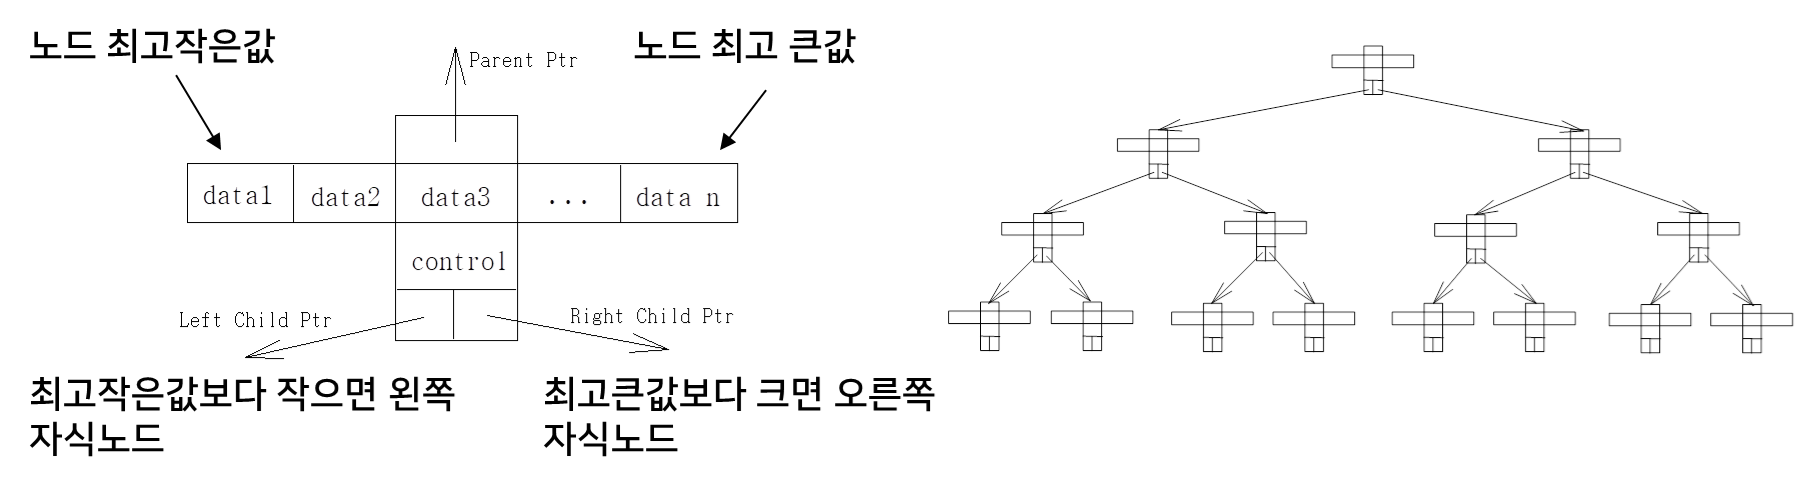 T 트리 구조.png